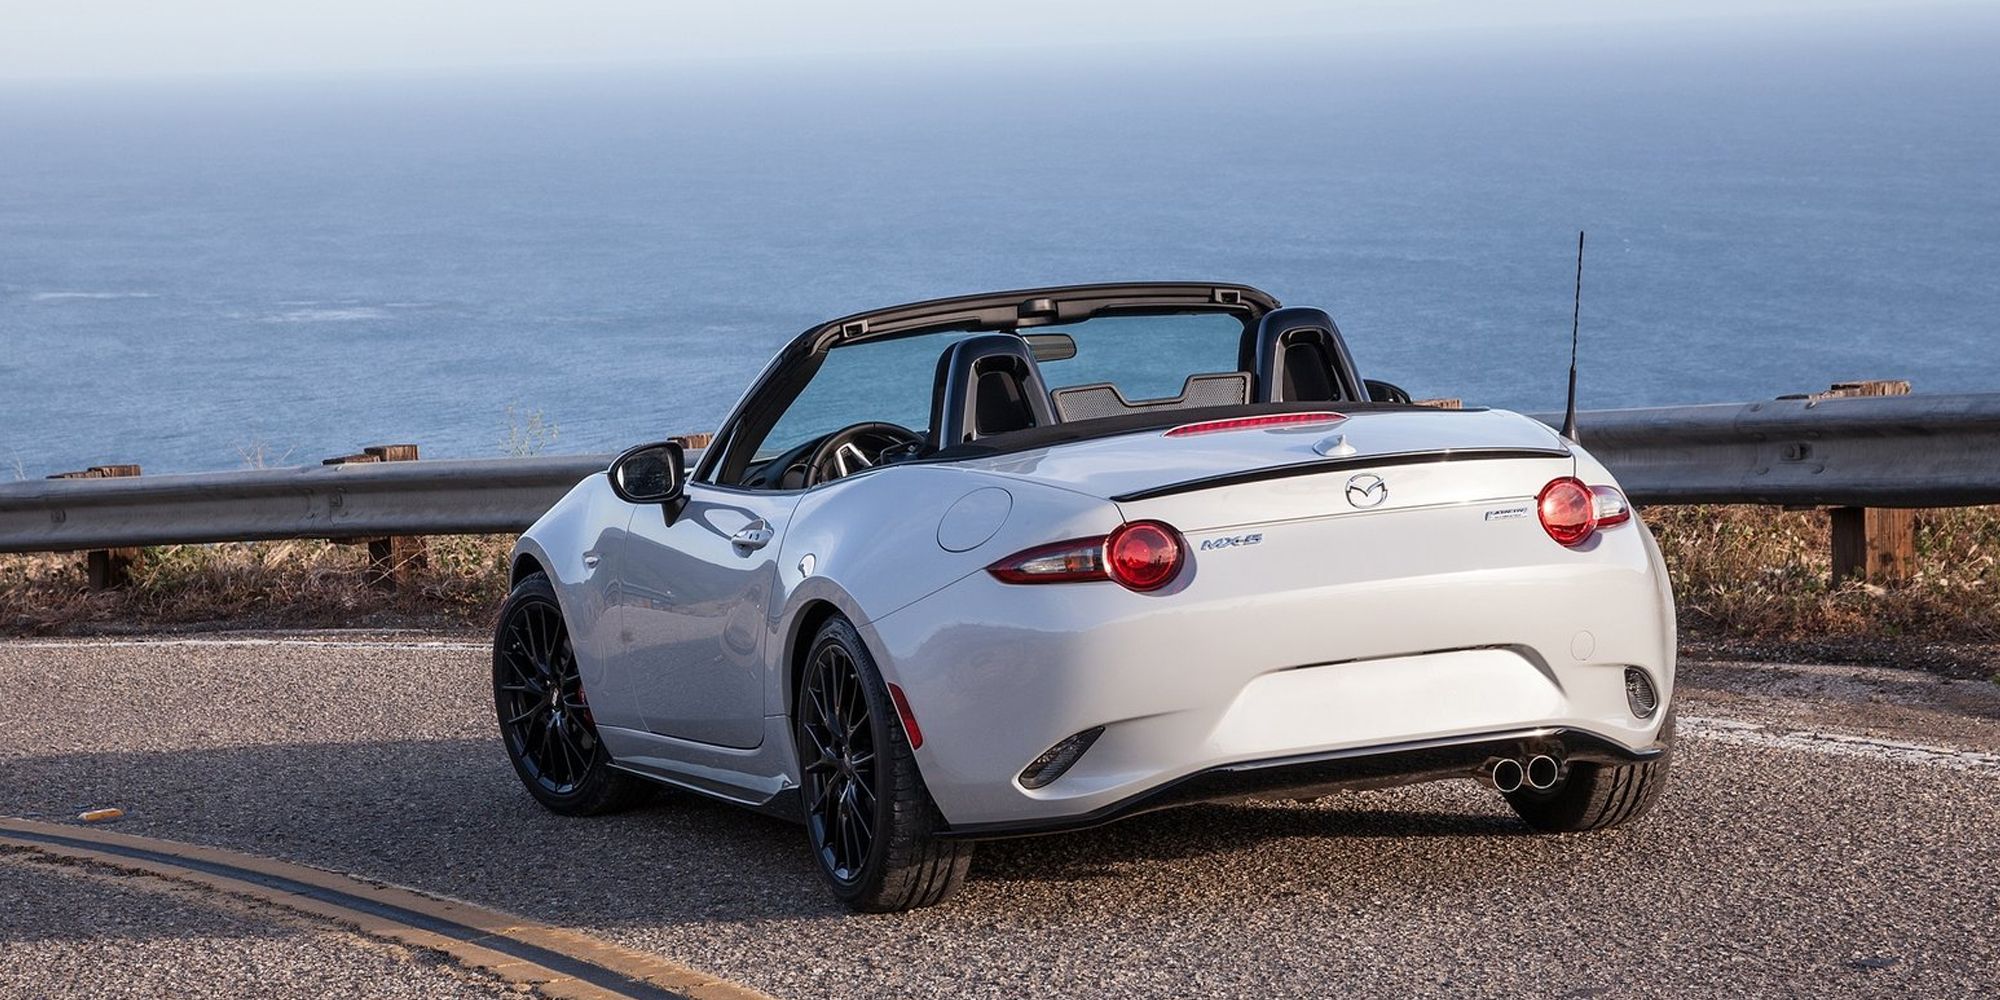 The rear of the MX-5 Club in white on a coastal road